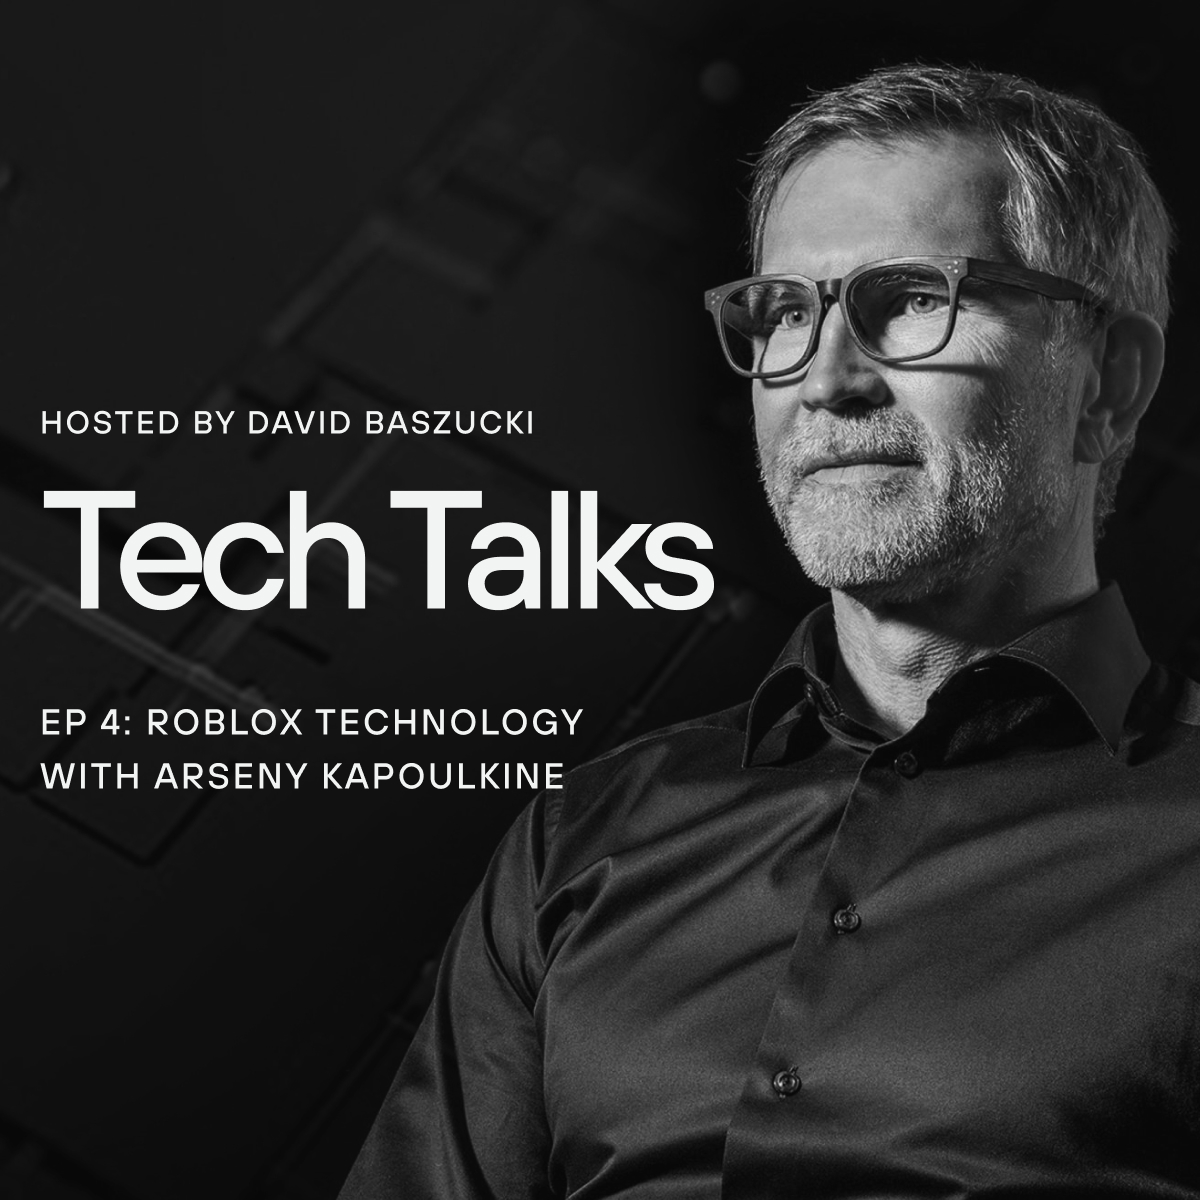 Roblox - Facial animation is essential for making avatars feel like an  authentic extension of self. Kiran Bhat joins David Baszucki in this  episode of Tech Talks to discuss the future of